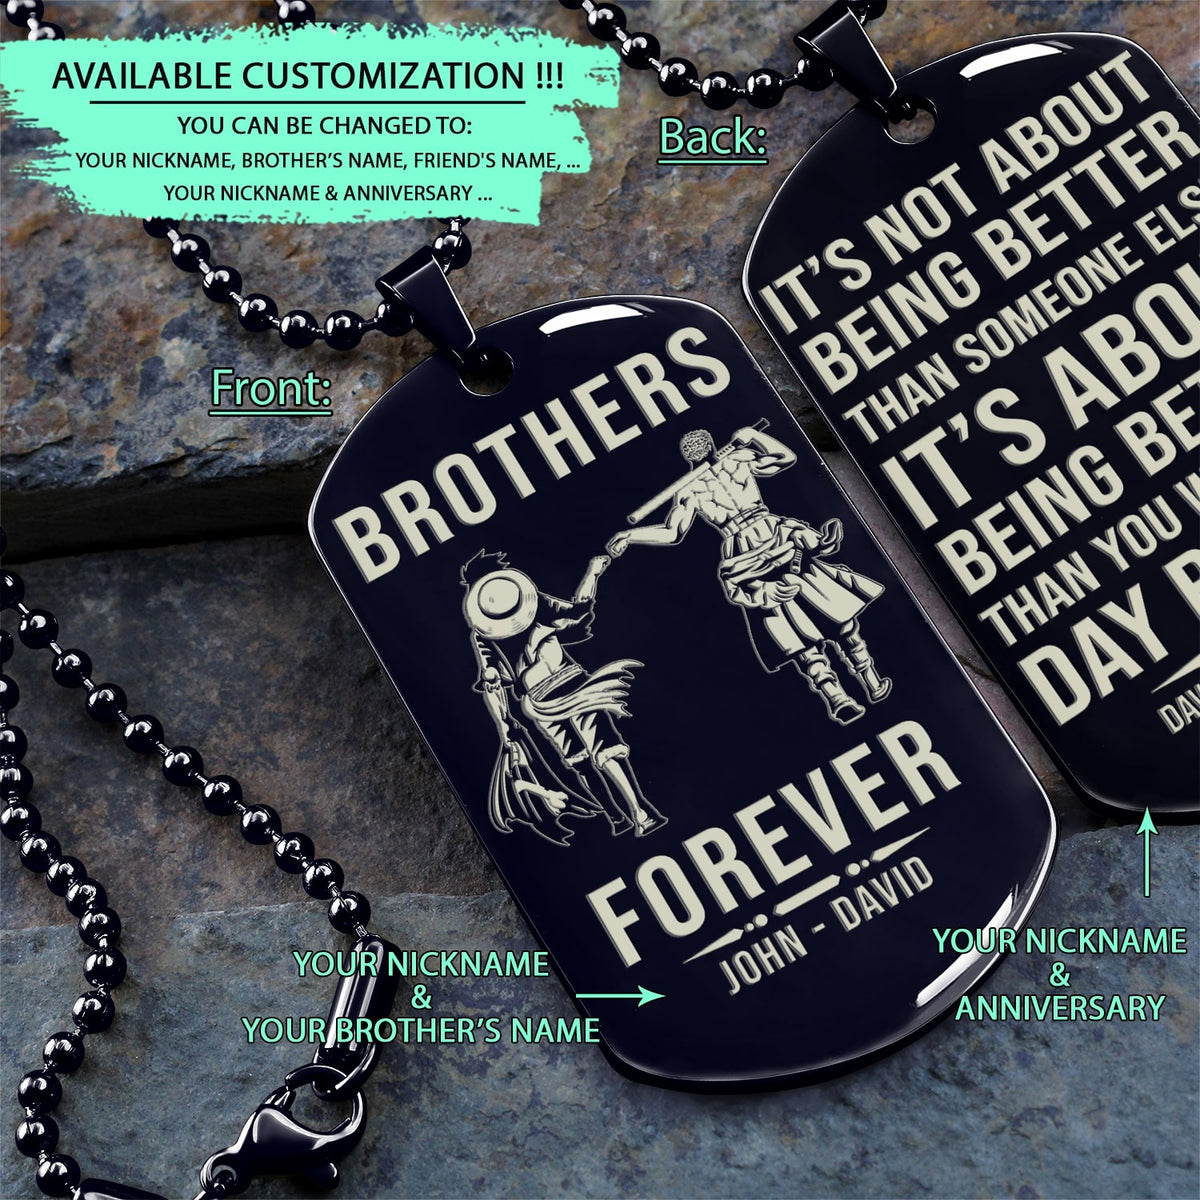 OPD037 - Brothers Forever - It's About Being Better Than You Were The Day Before - Monkey D. Luffy - Roronoa Zoro - One Piece Dog Tag - Double Sided Engrave Black Dog Tag